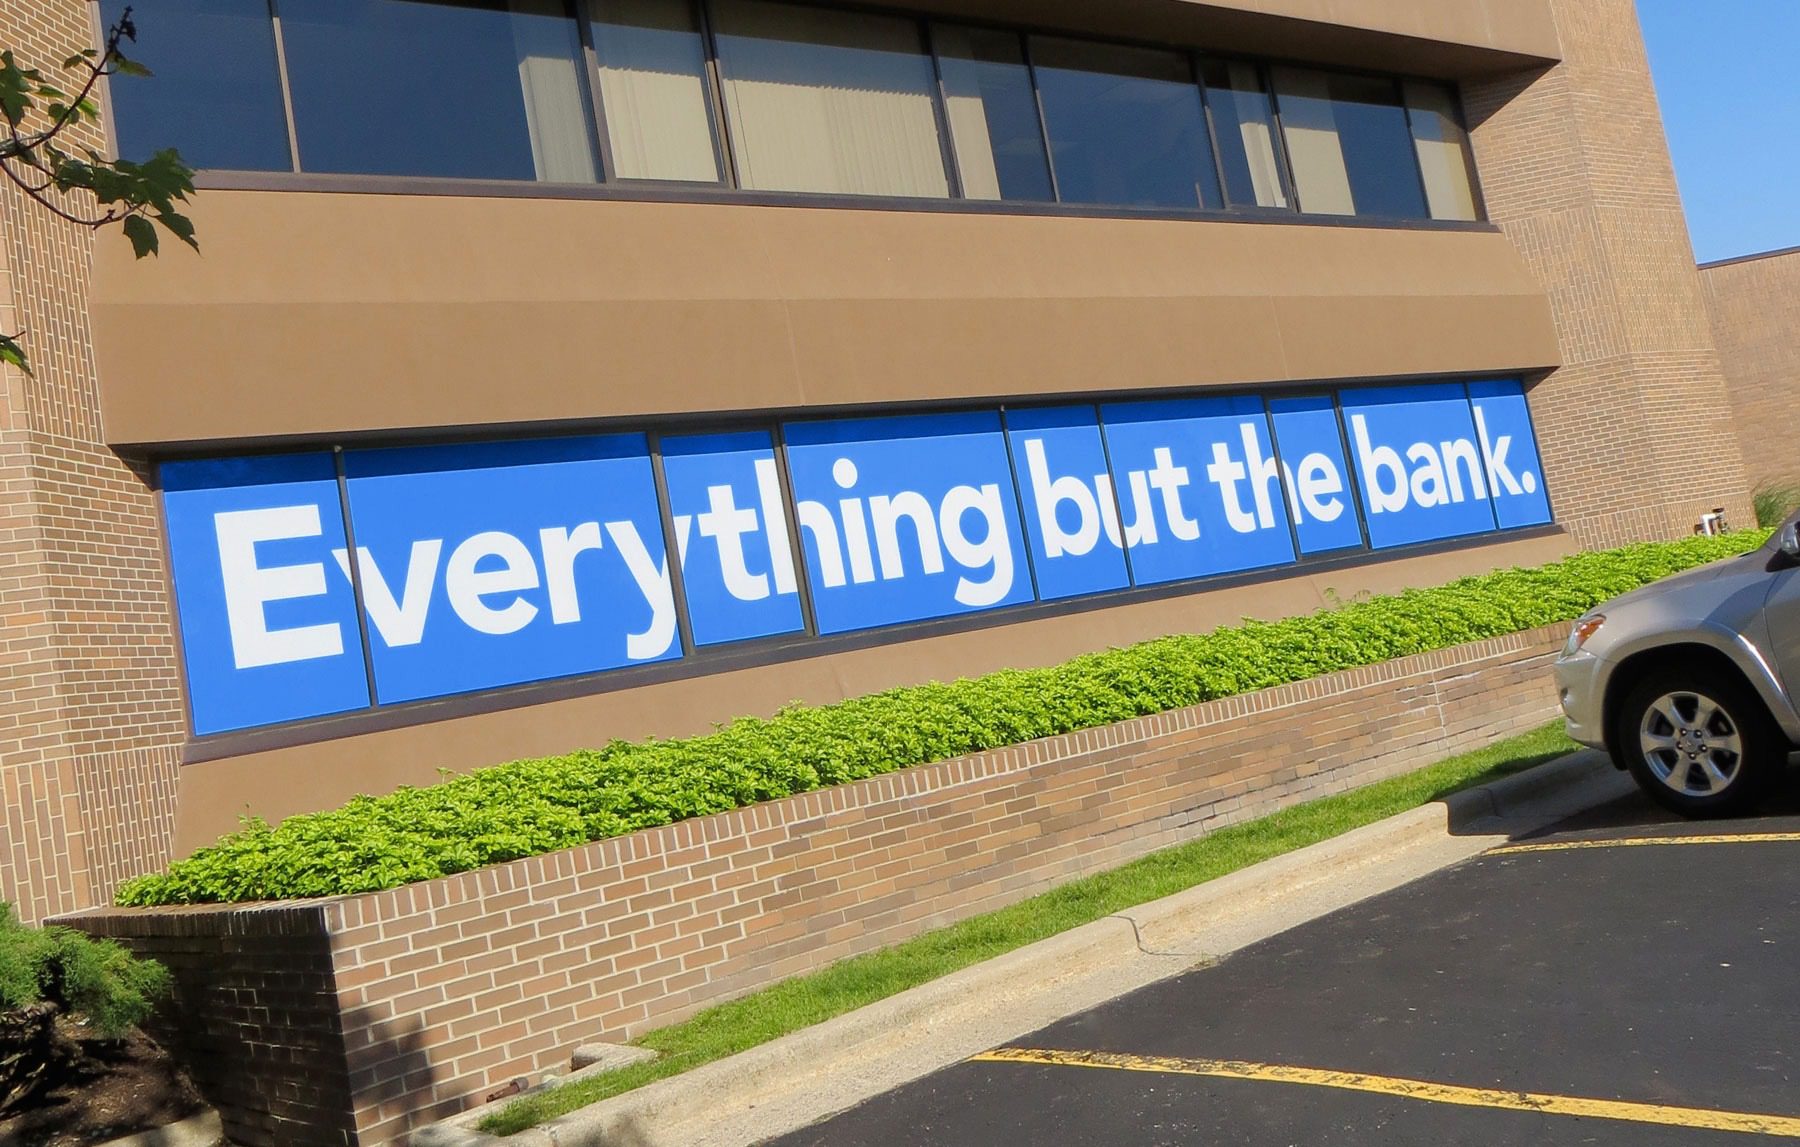 Window decals "Everything but the bank" FEDCOM Credit Union